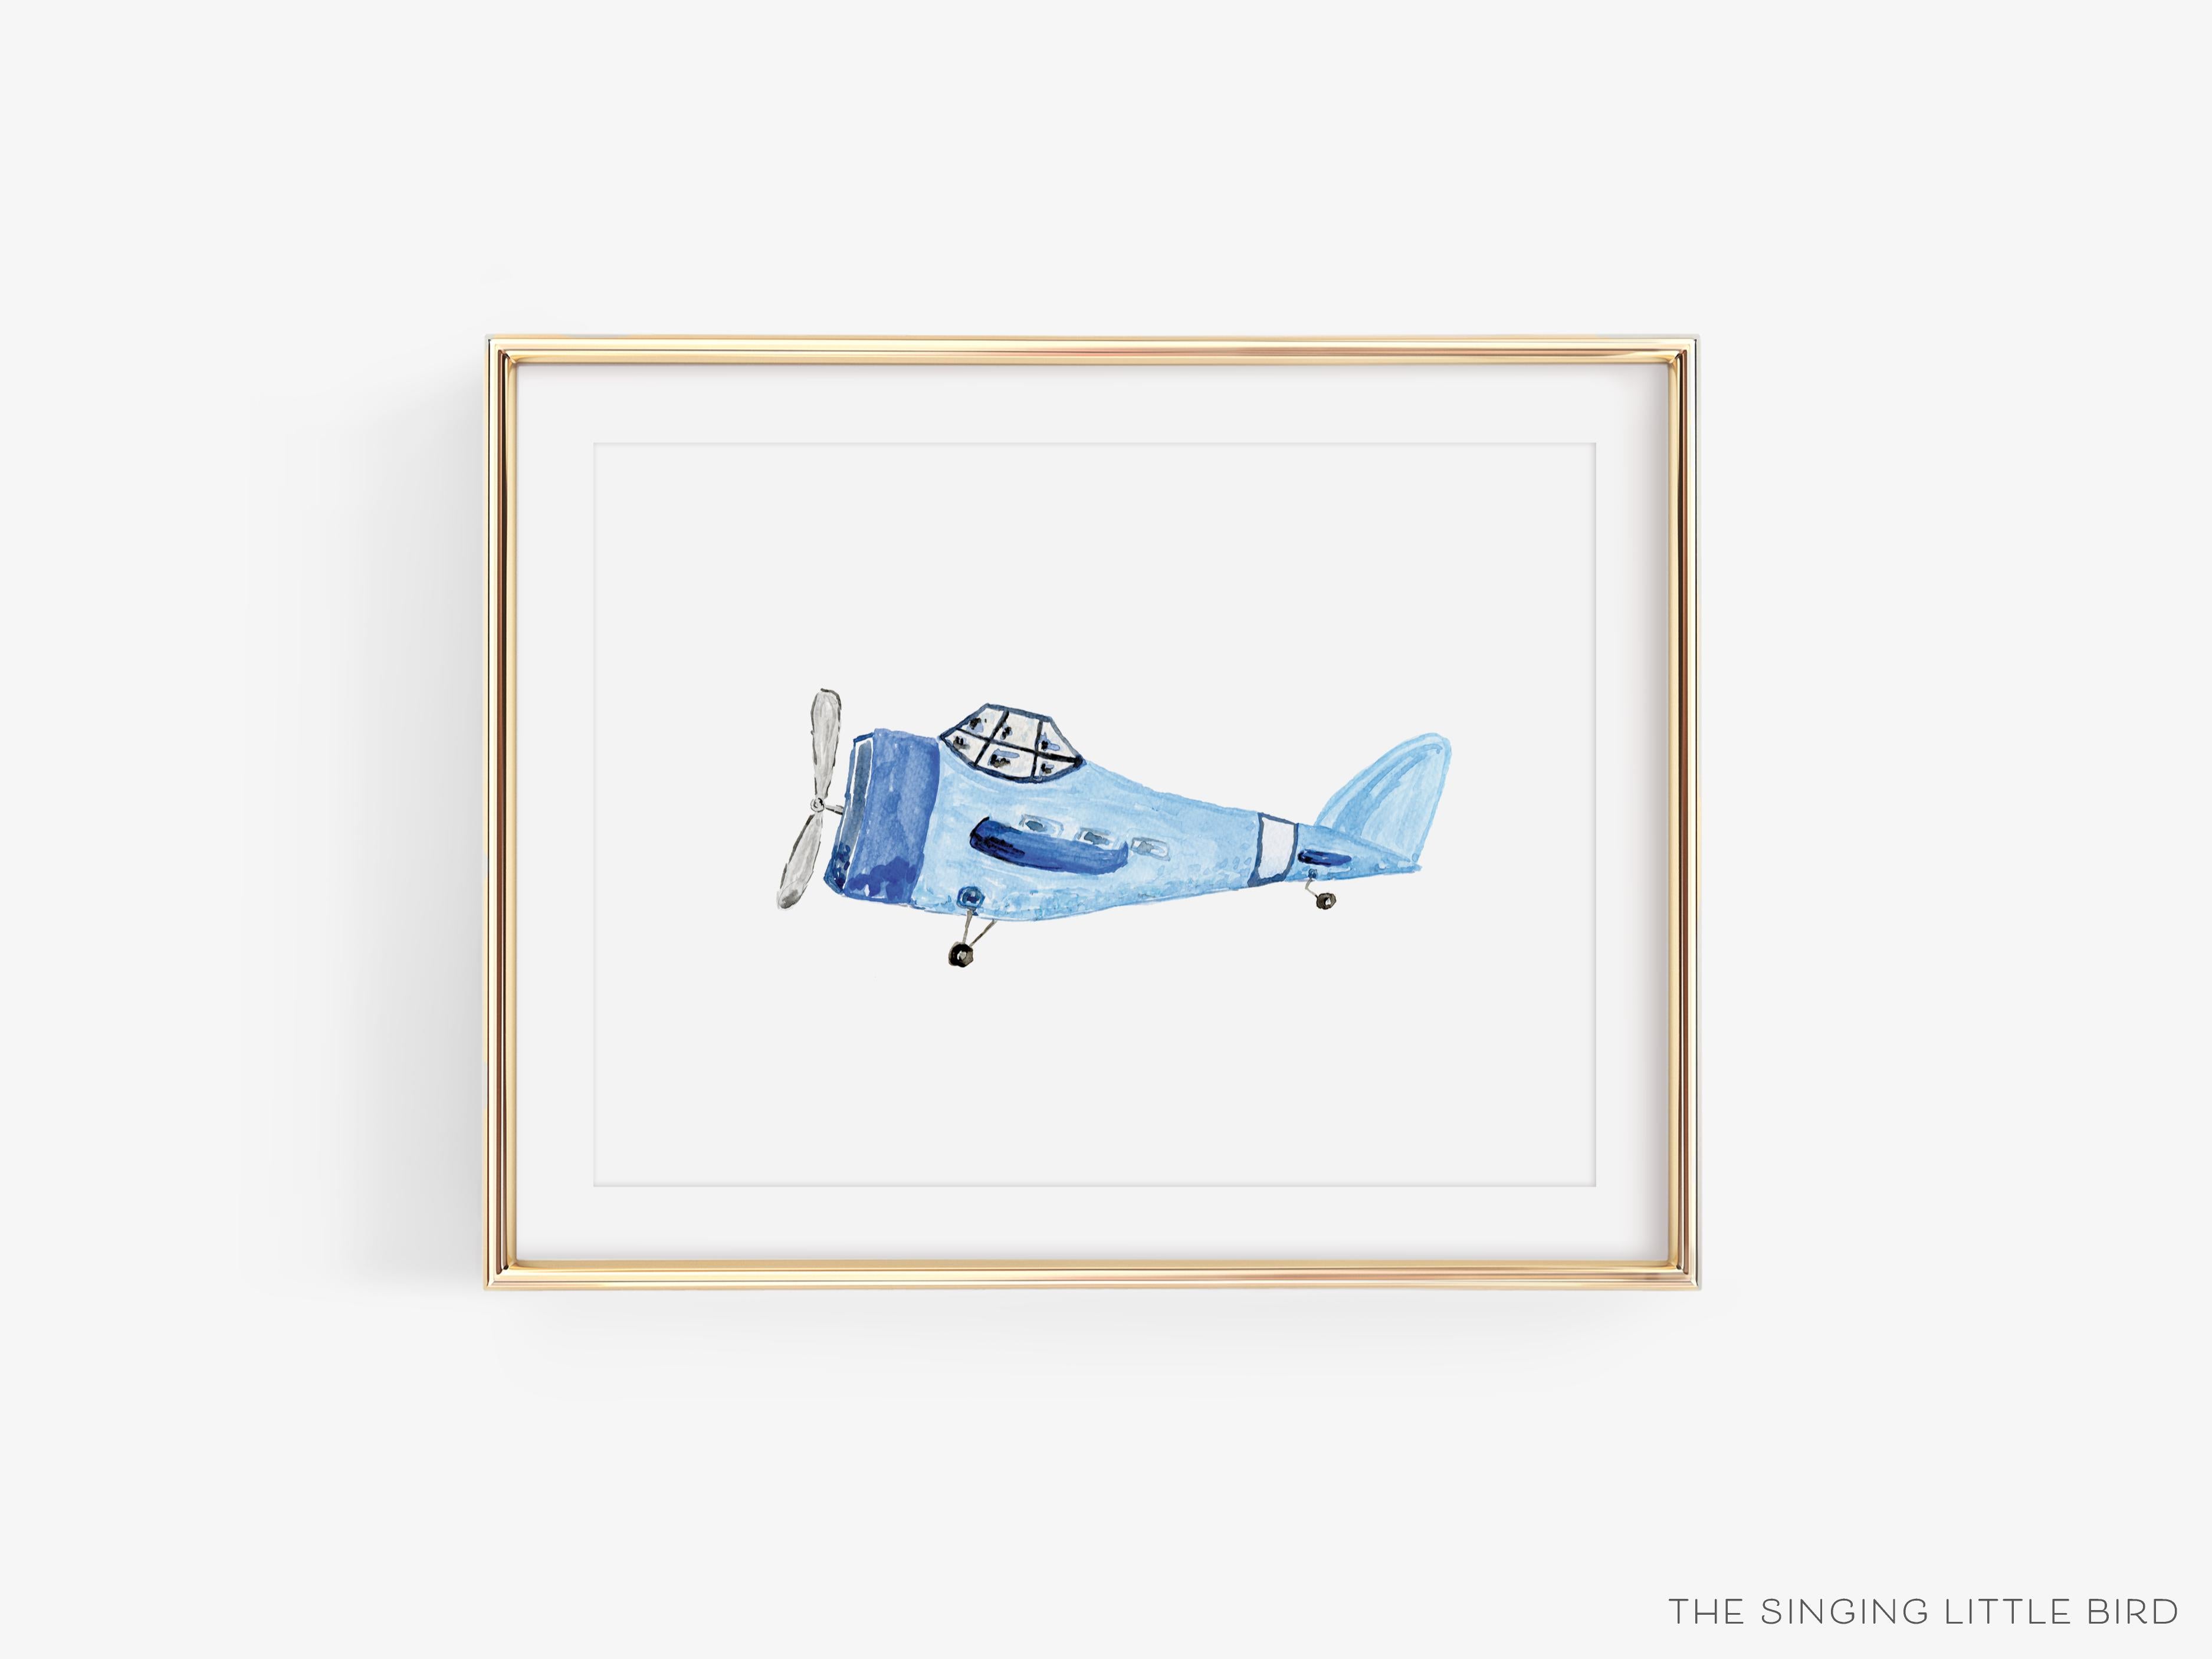 Vintage Airplane Art Print-This watercolor art print features our hand-painted vintage airplane, printed in the USA on 120lb high quality art paper. This makes a great gift or wall decor for the vintage lover in your life.-The Singing Little Bird